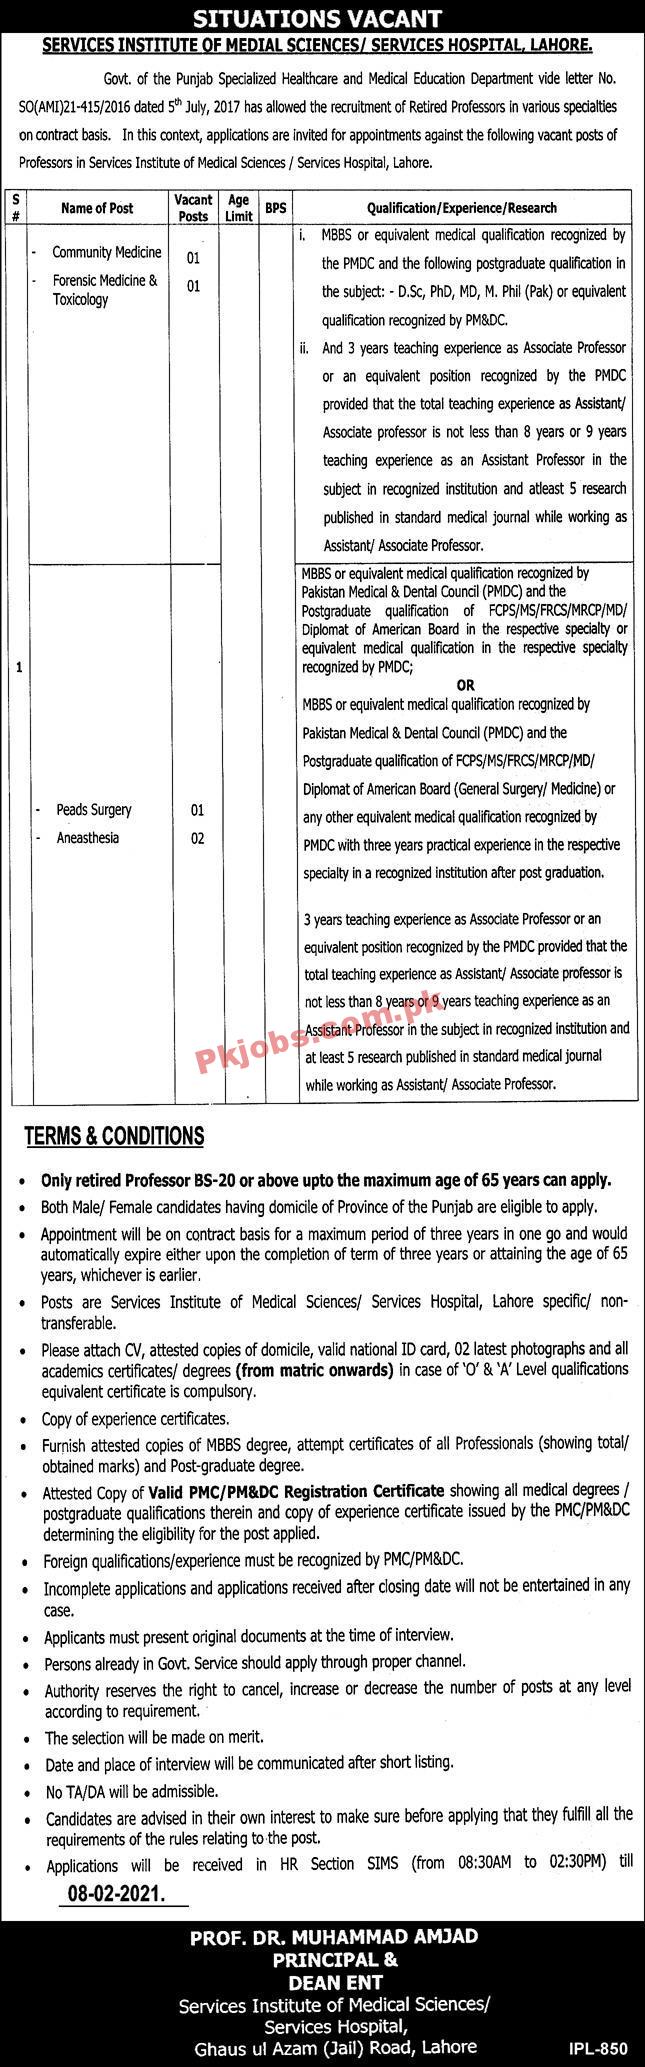 Jobs in Government of the Punjab Specialized Healthcare and Medical Education Department